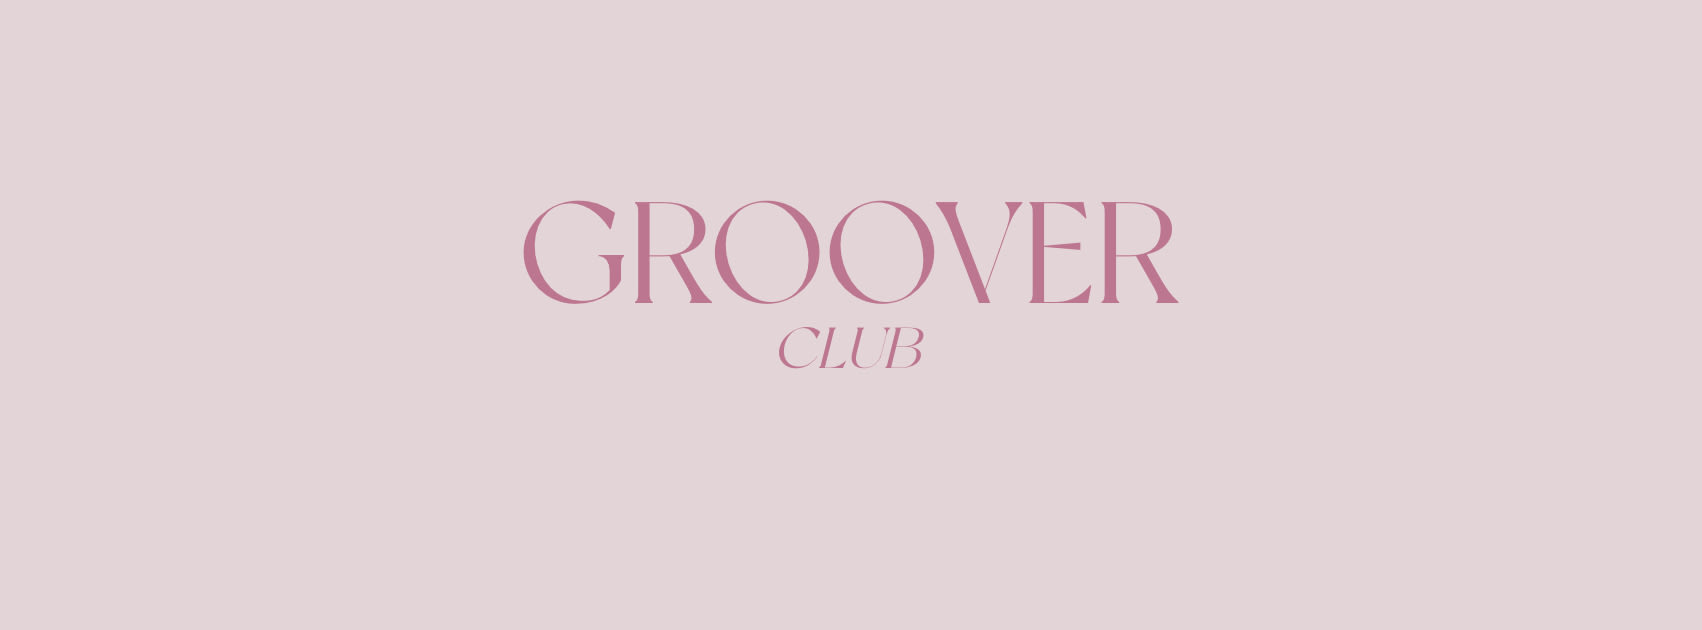 Groover Club